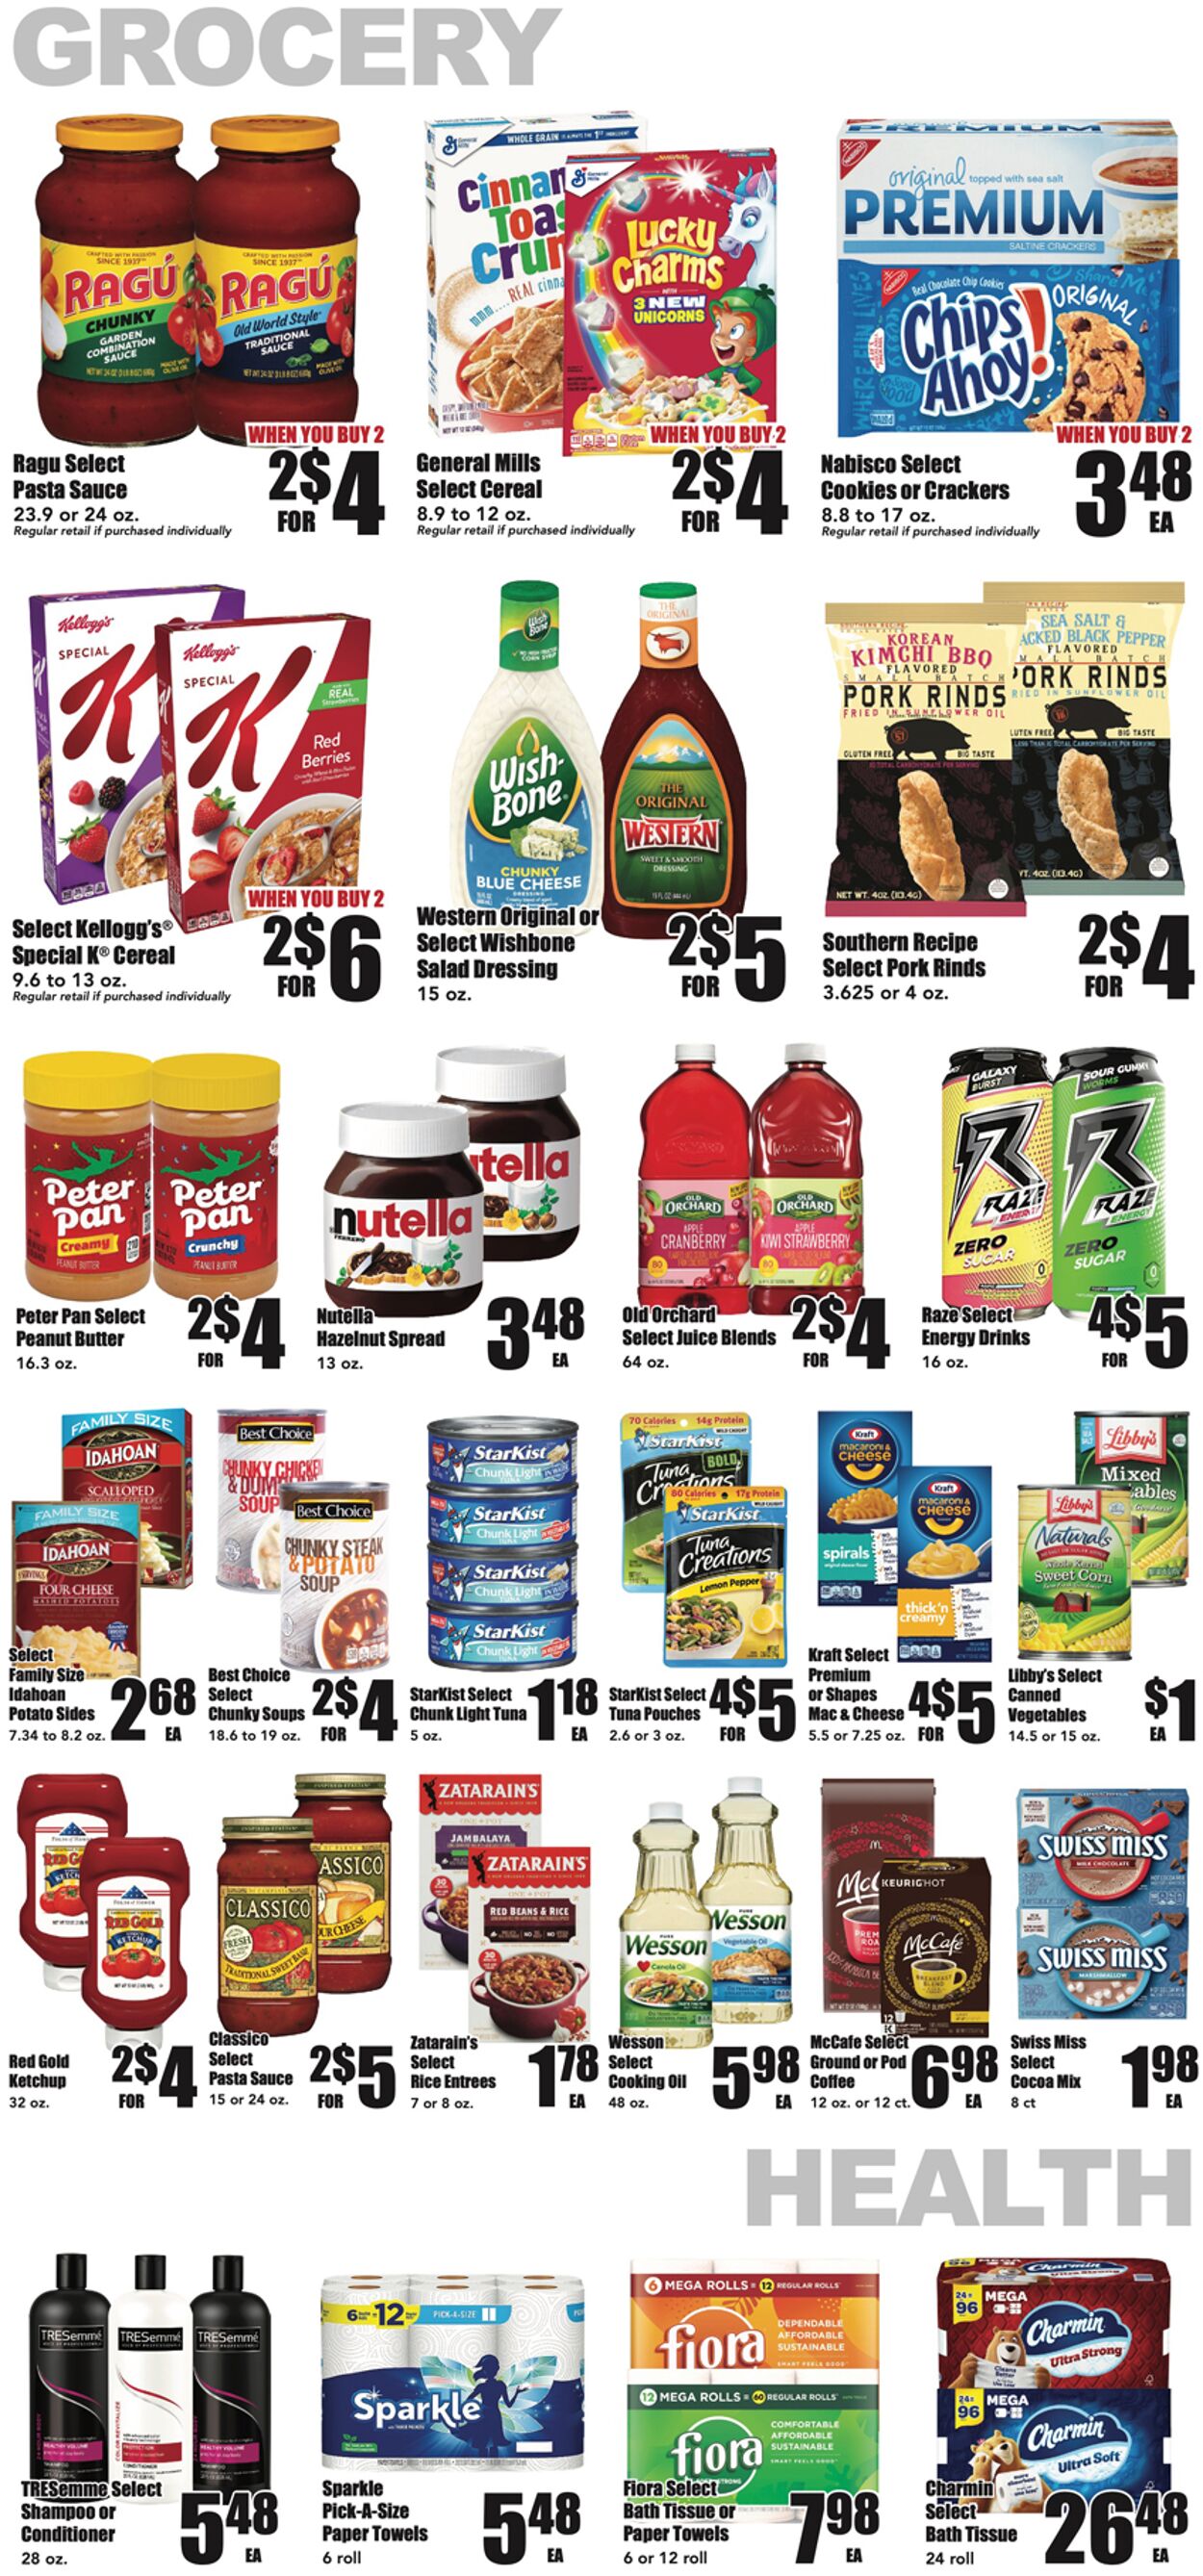 Warehouse Market Ad from 02/22/2023